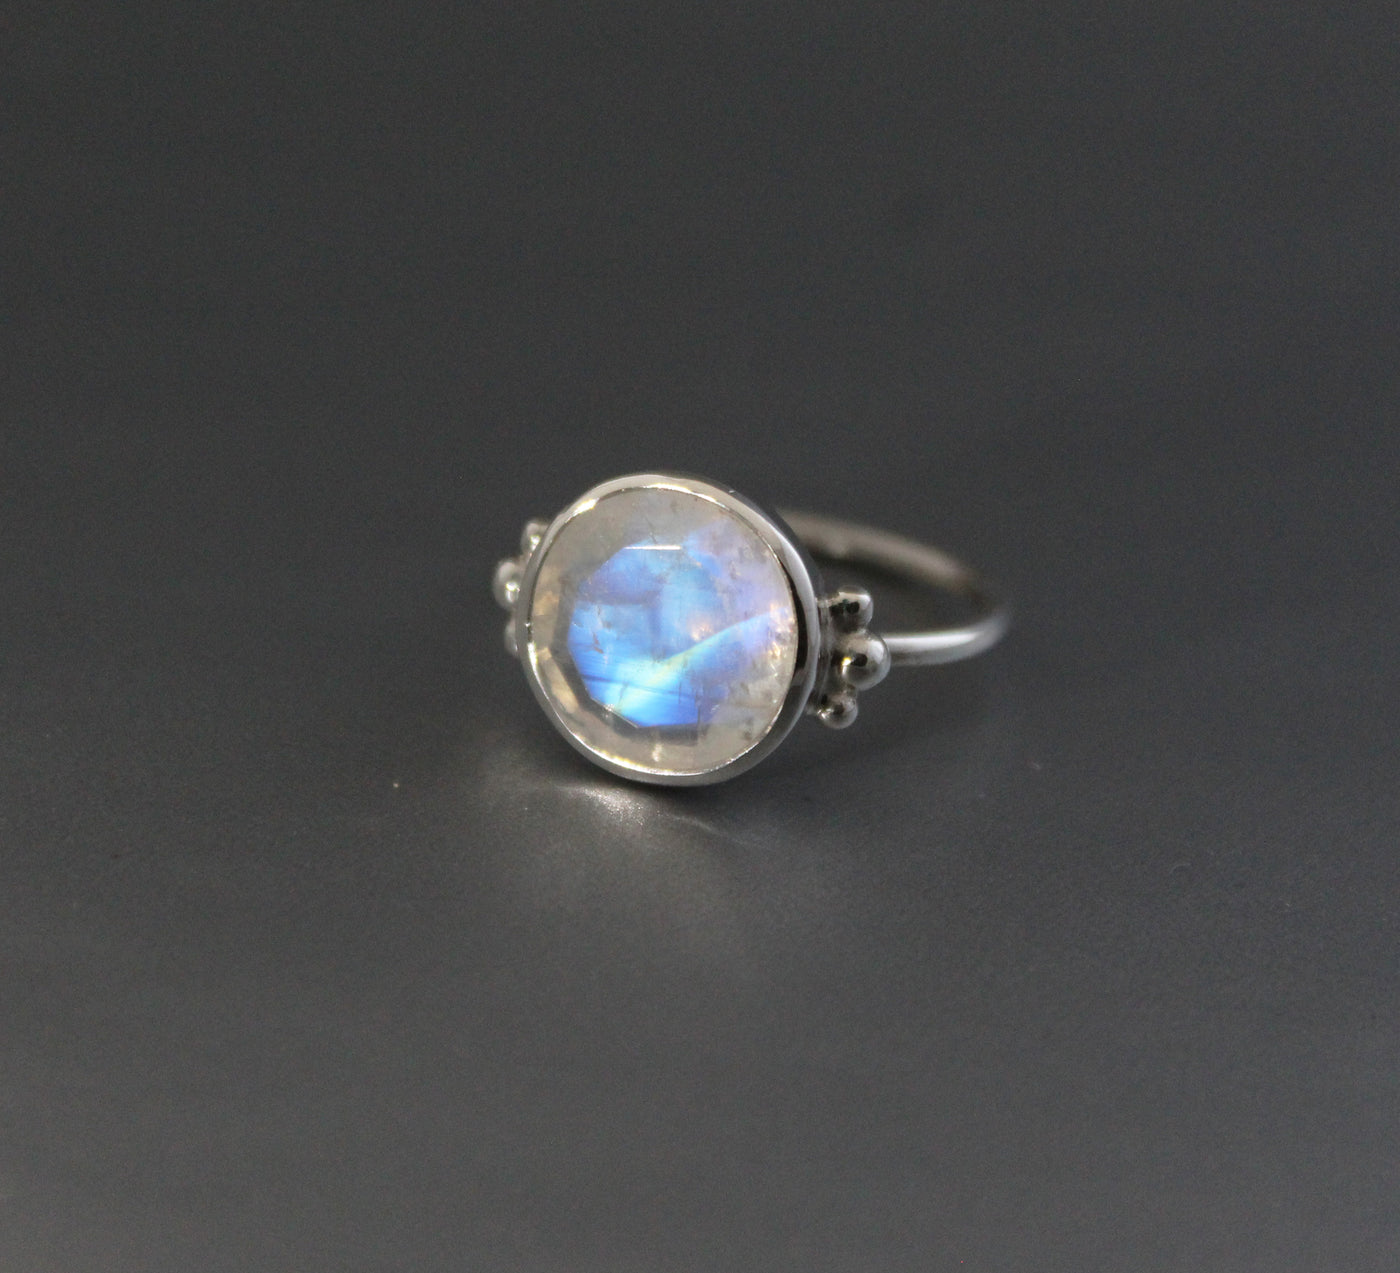 Natural Rainbow Moonstone Ring,Blue Fire Moonstone Ring,Boho Simple Ring ,Handmade Silver Ring,Gift for her,Promise Ring,Anniversary Ring